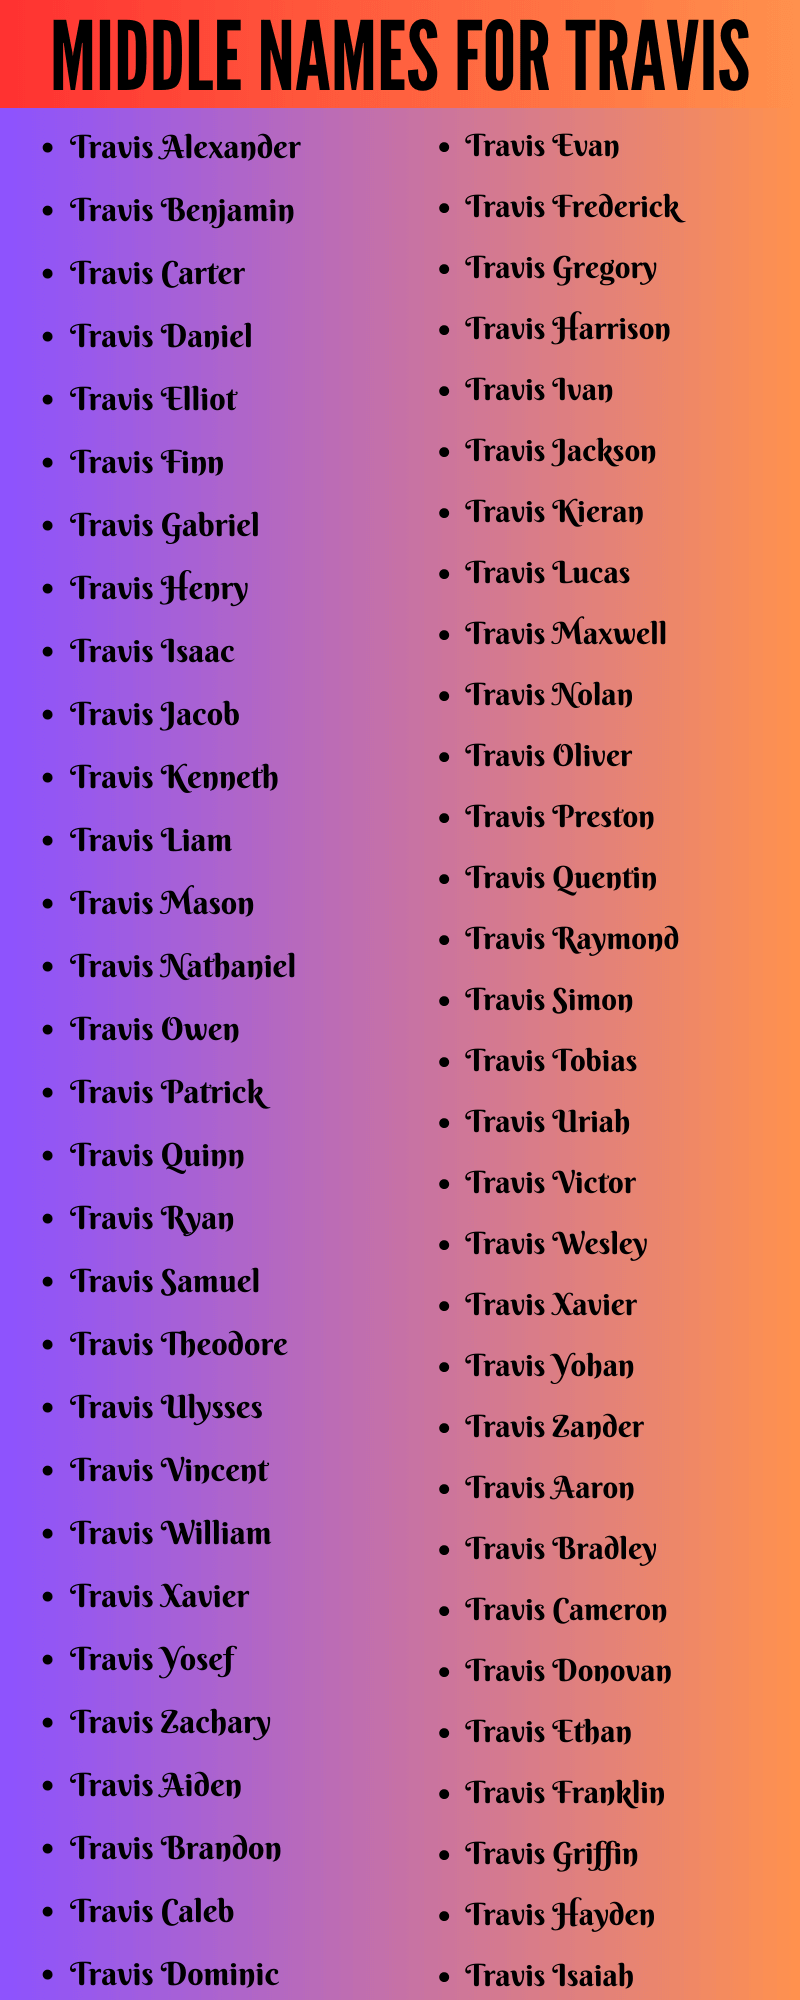 400 Best Middle Names For Travis